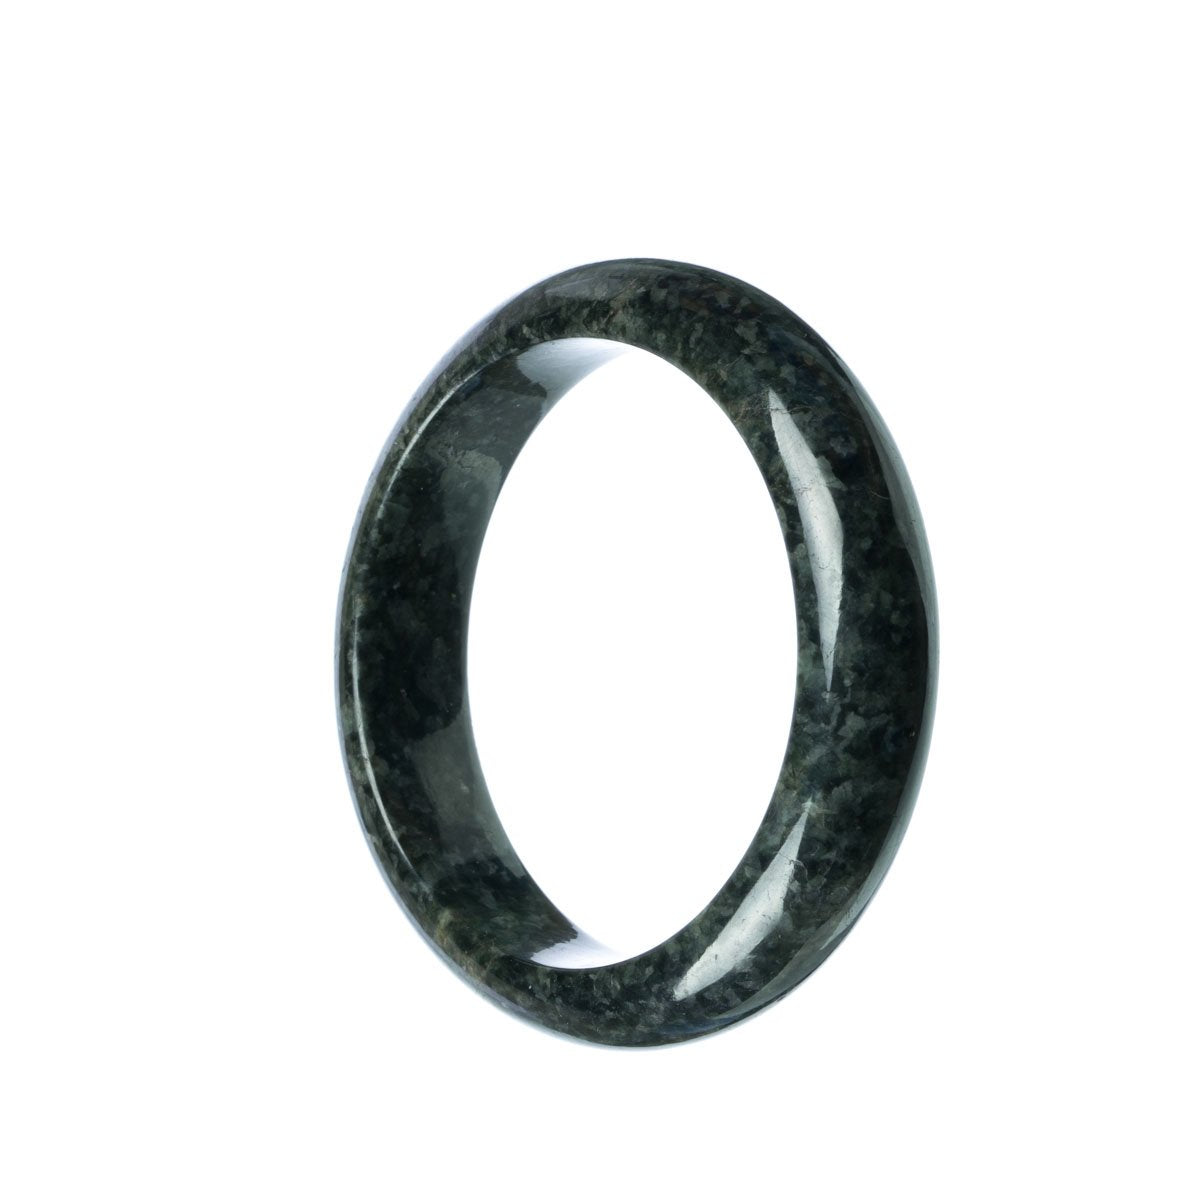 A half moon-shaped dark grey jade bangle bracelet, untreated and authentic, measuring 55mm in diameter.